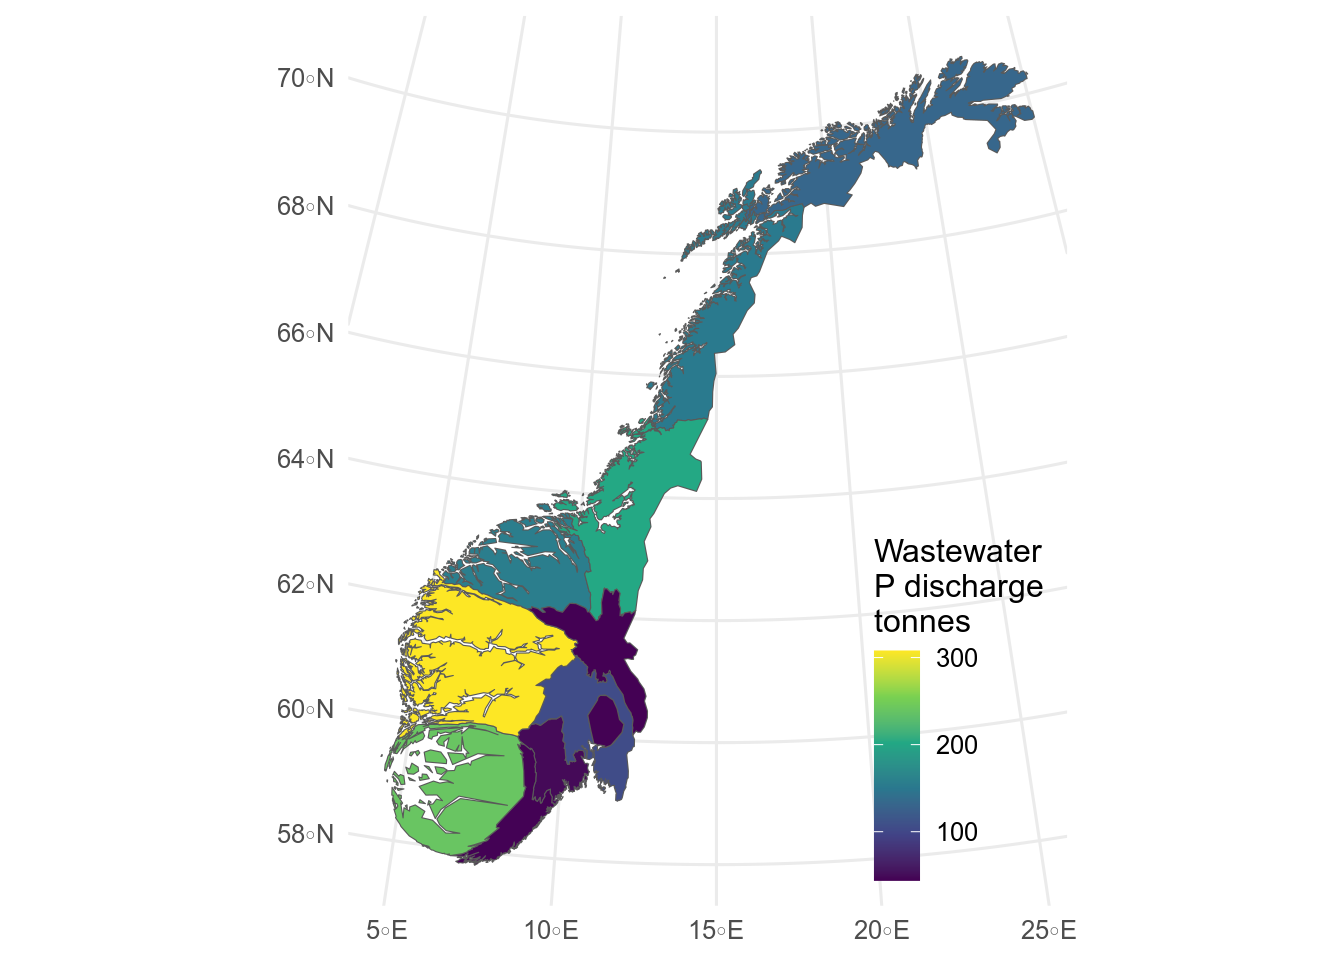 Cartogram showing total phosphate discharge in municipal wastewater by fylke. Vestland is larger and Innlandet is smaller than in the normal map.